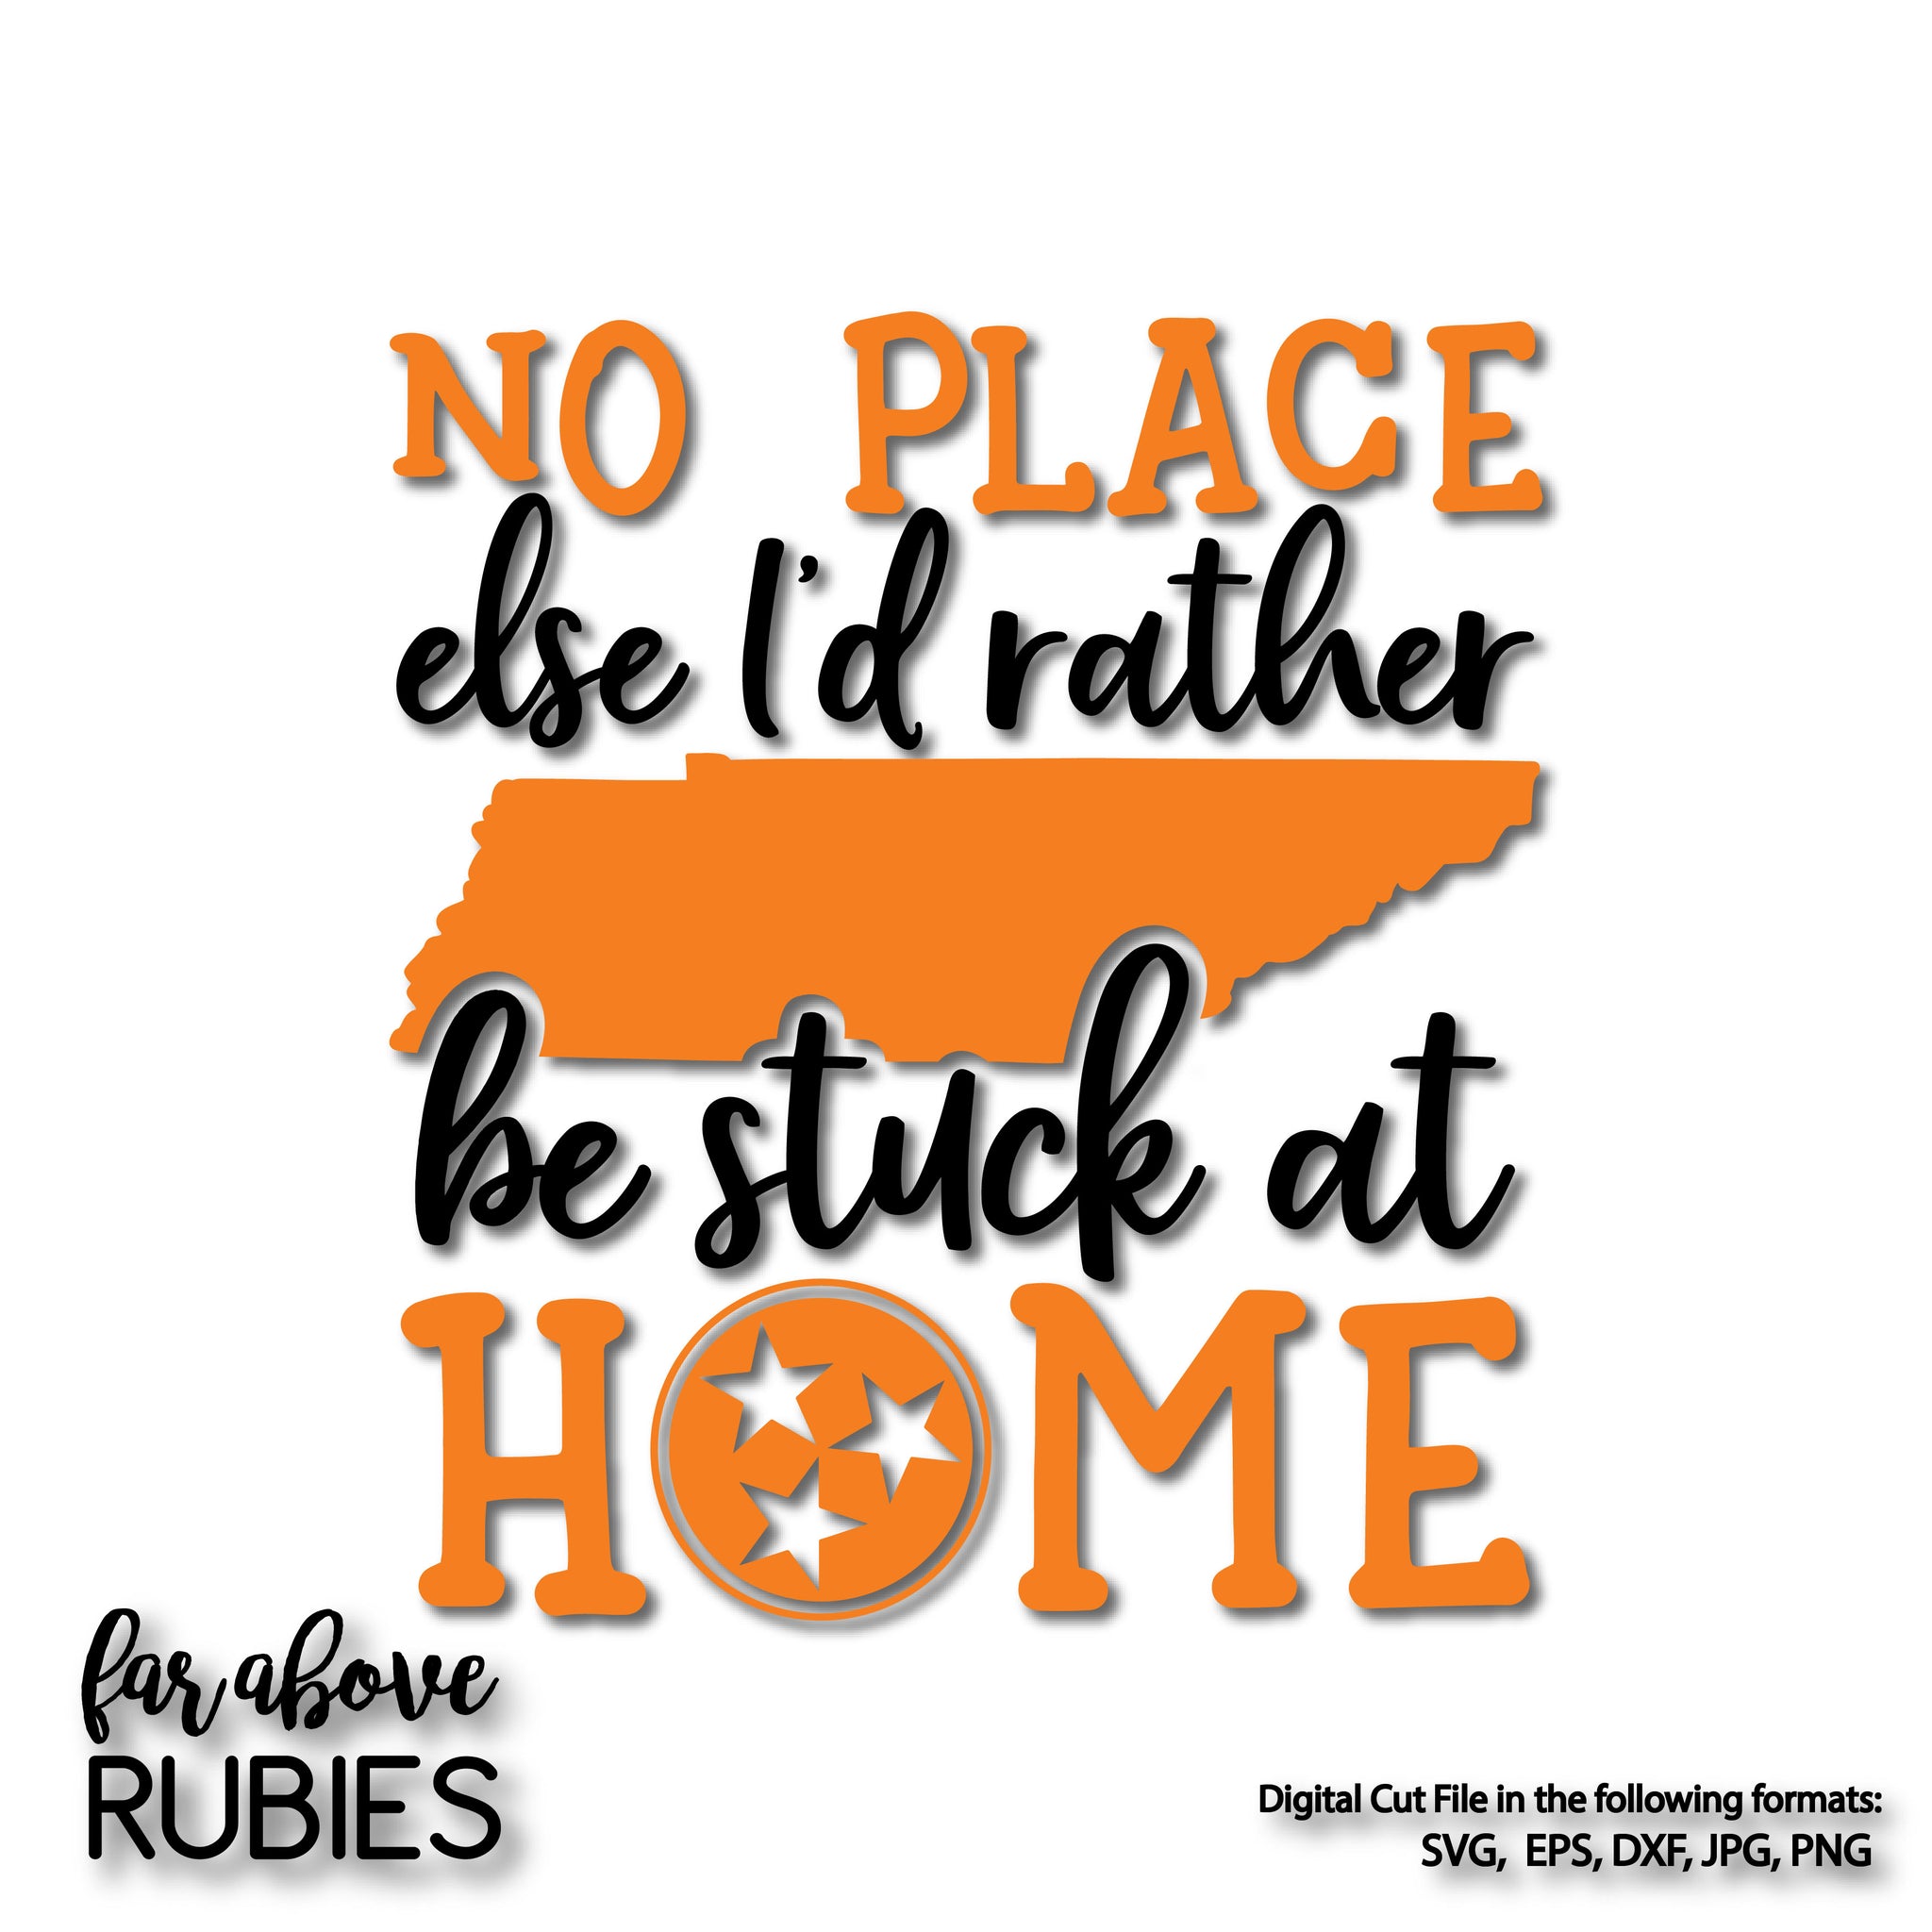 Download No Place I D Rather Be Stuck At Home Tennessee Tn Tri Star Tristar Dig Faraboverubies Designs